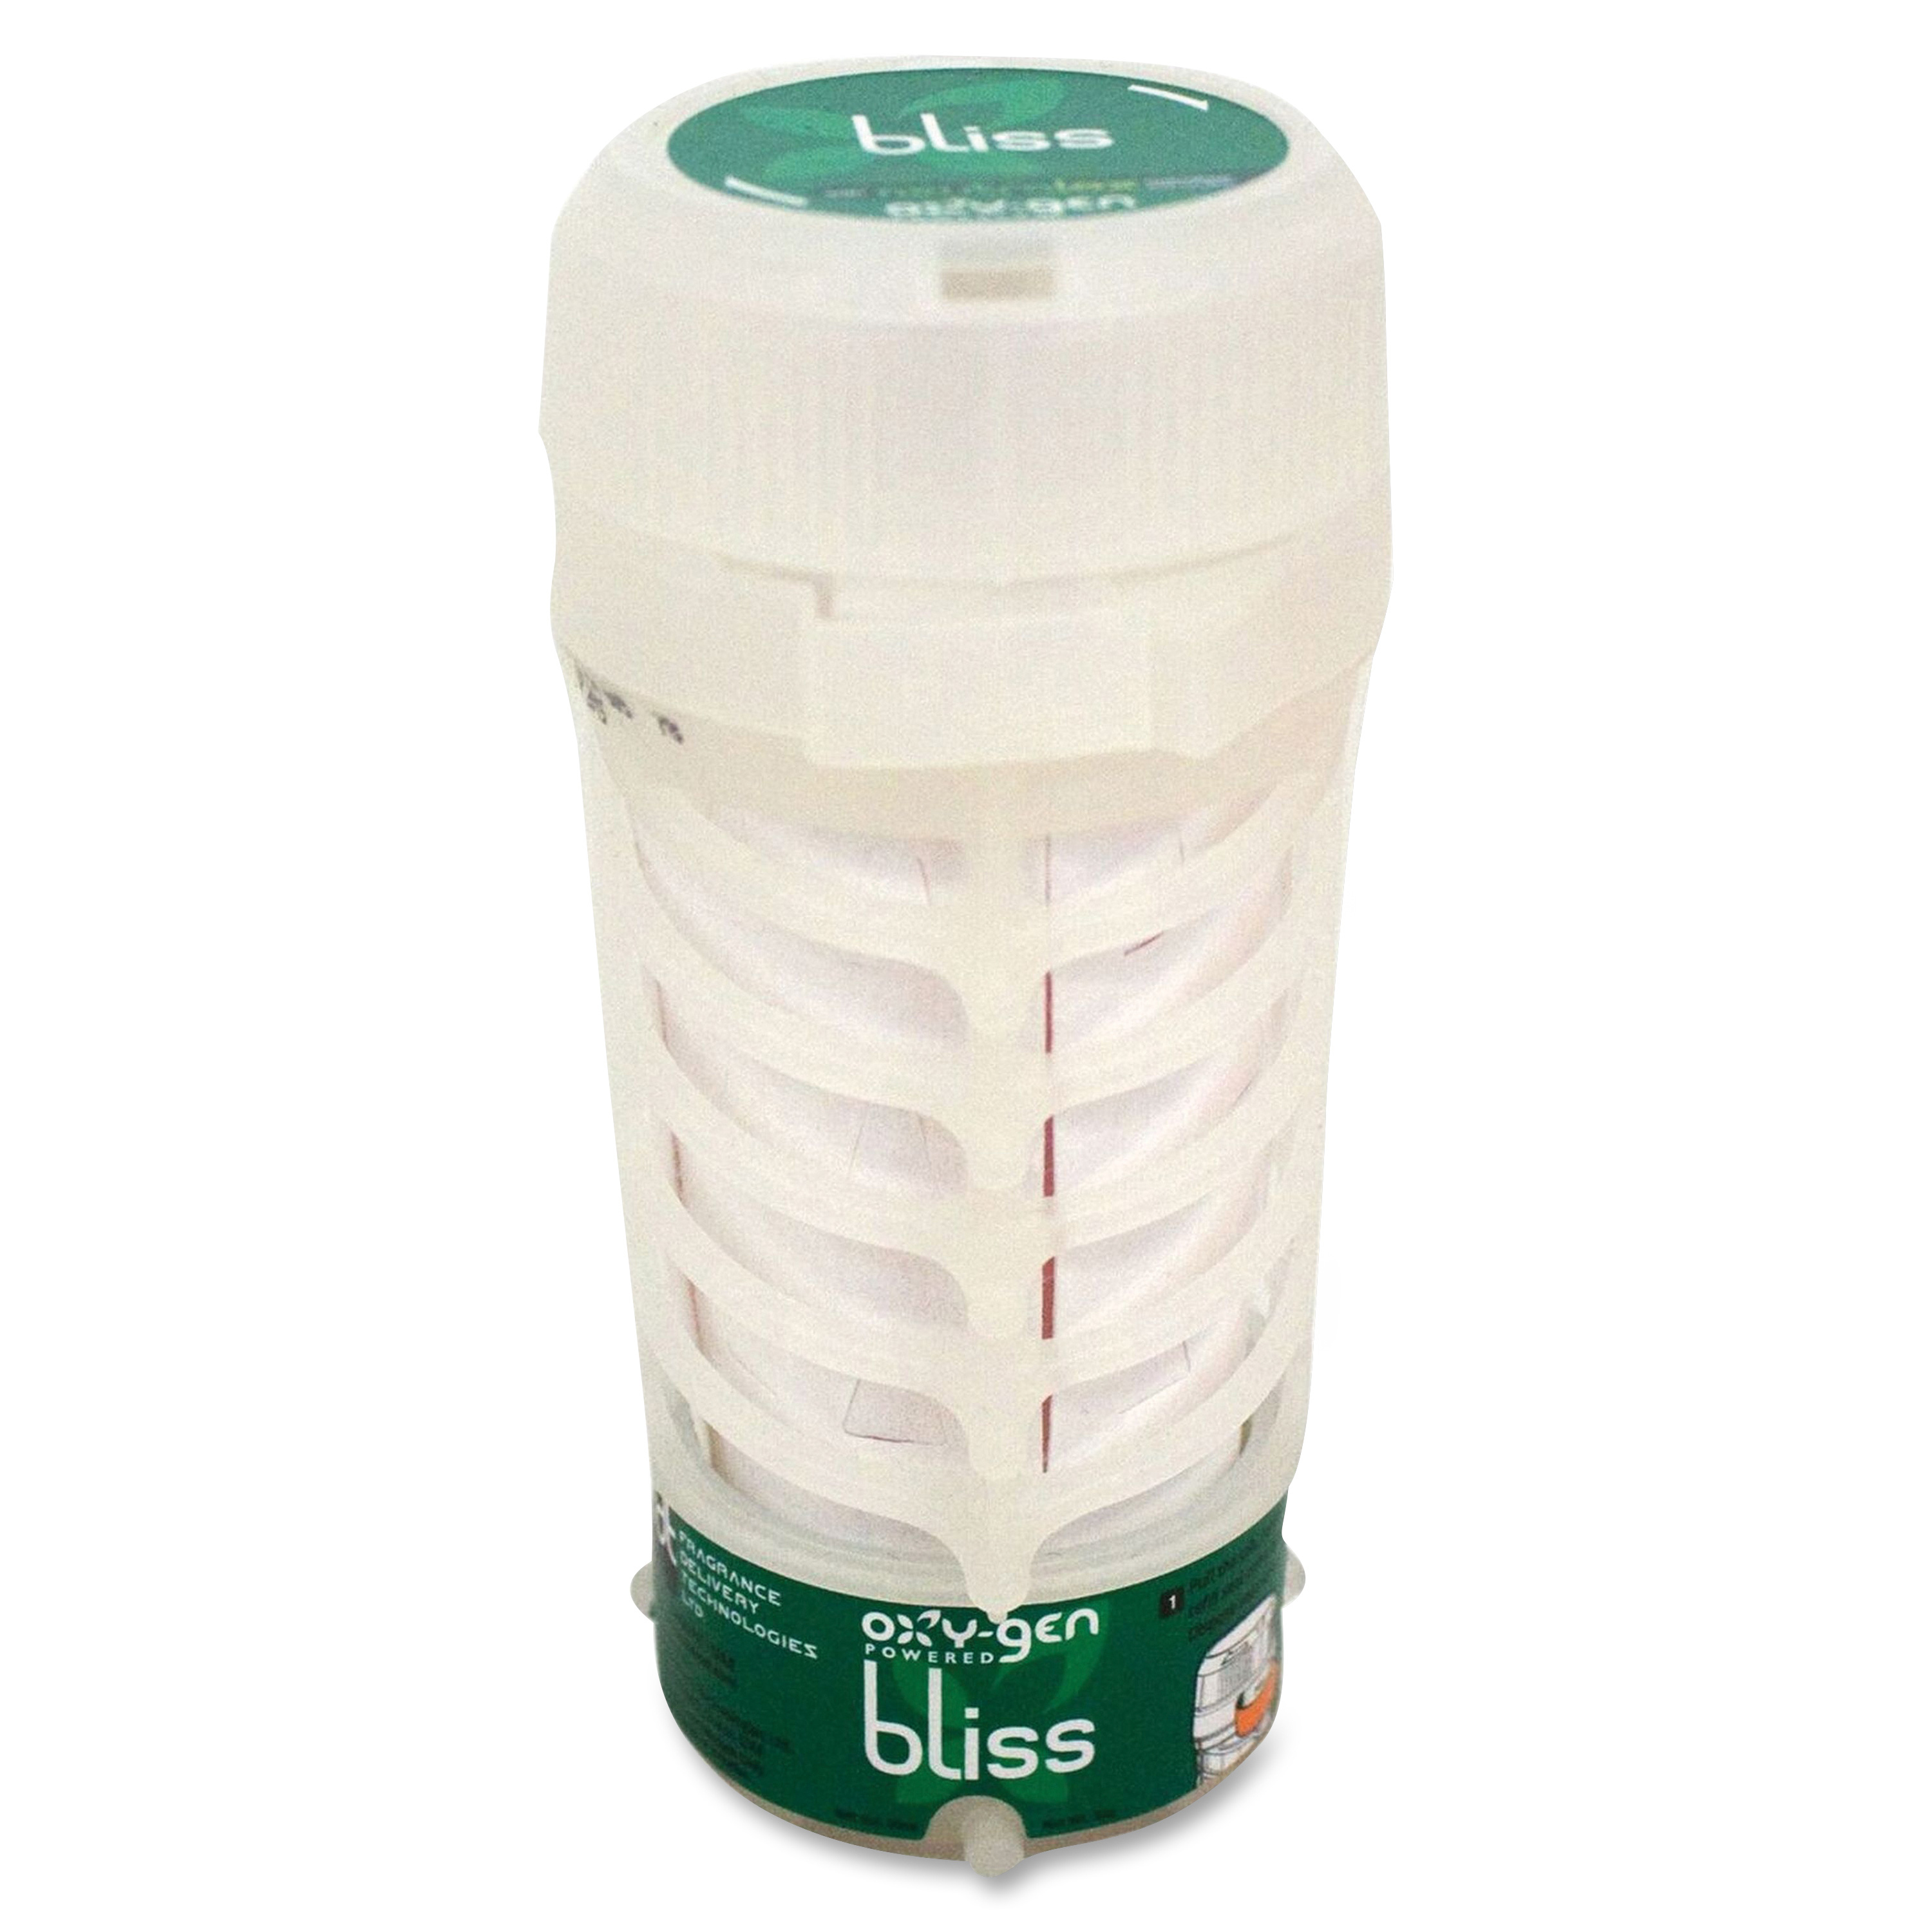 RMC, RCM11963186, Care Sys Dispenser Bliss Scent, 1 Each, White/Green - image 2 of 2